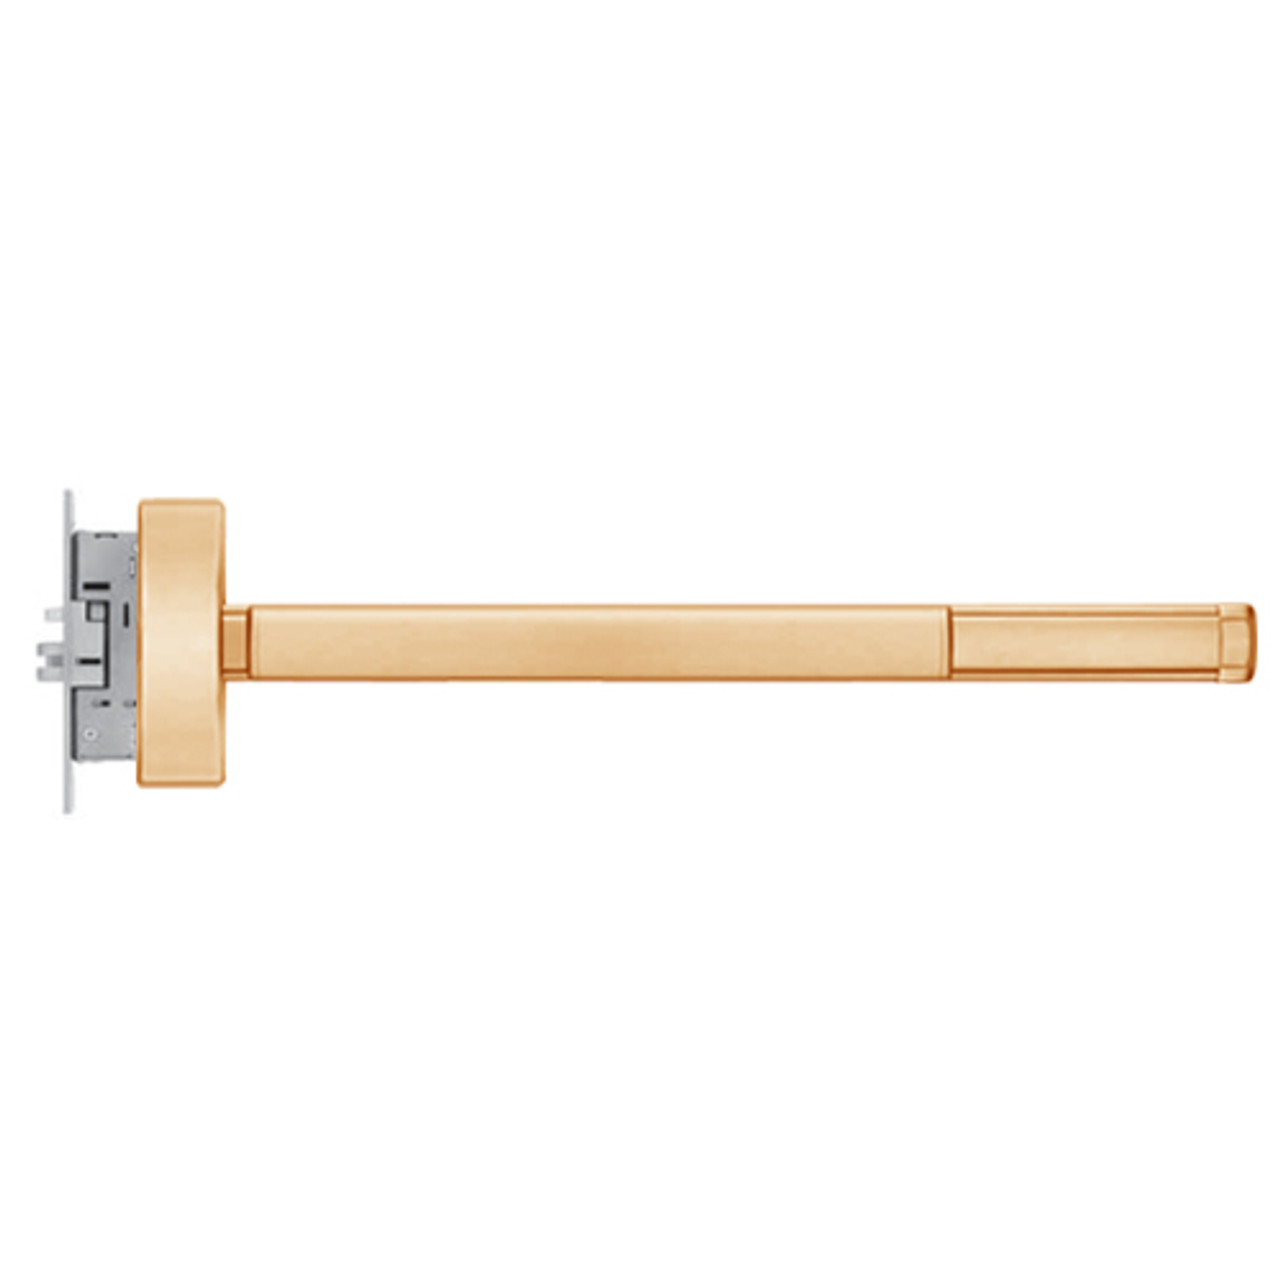 2303CD-LHR-612-48 PHI 2300 Series Non Fire Rated Apex Mortise Exit Device Prepped for Key Retracts Latchbolt with Cylinder Dogging in Satin Bronze Finish